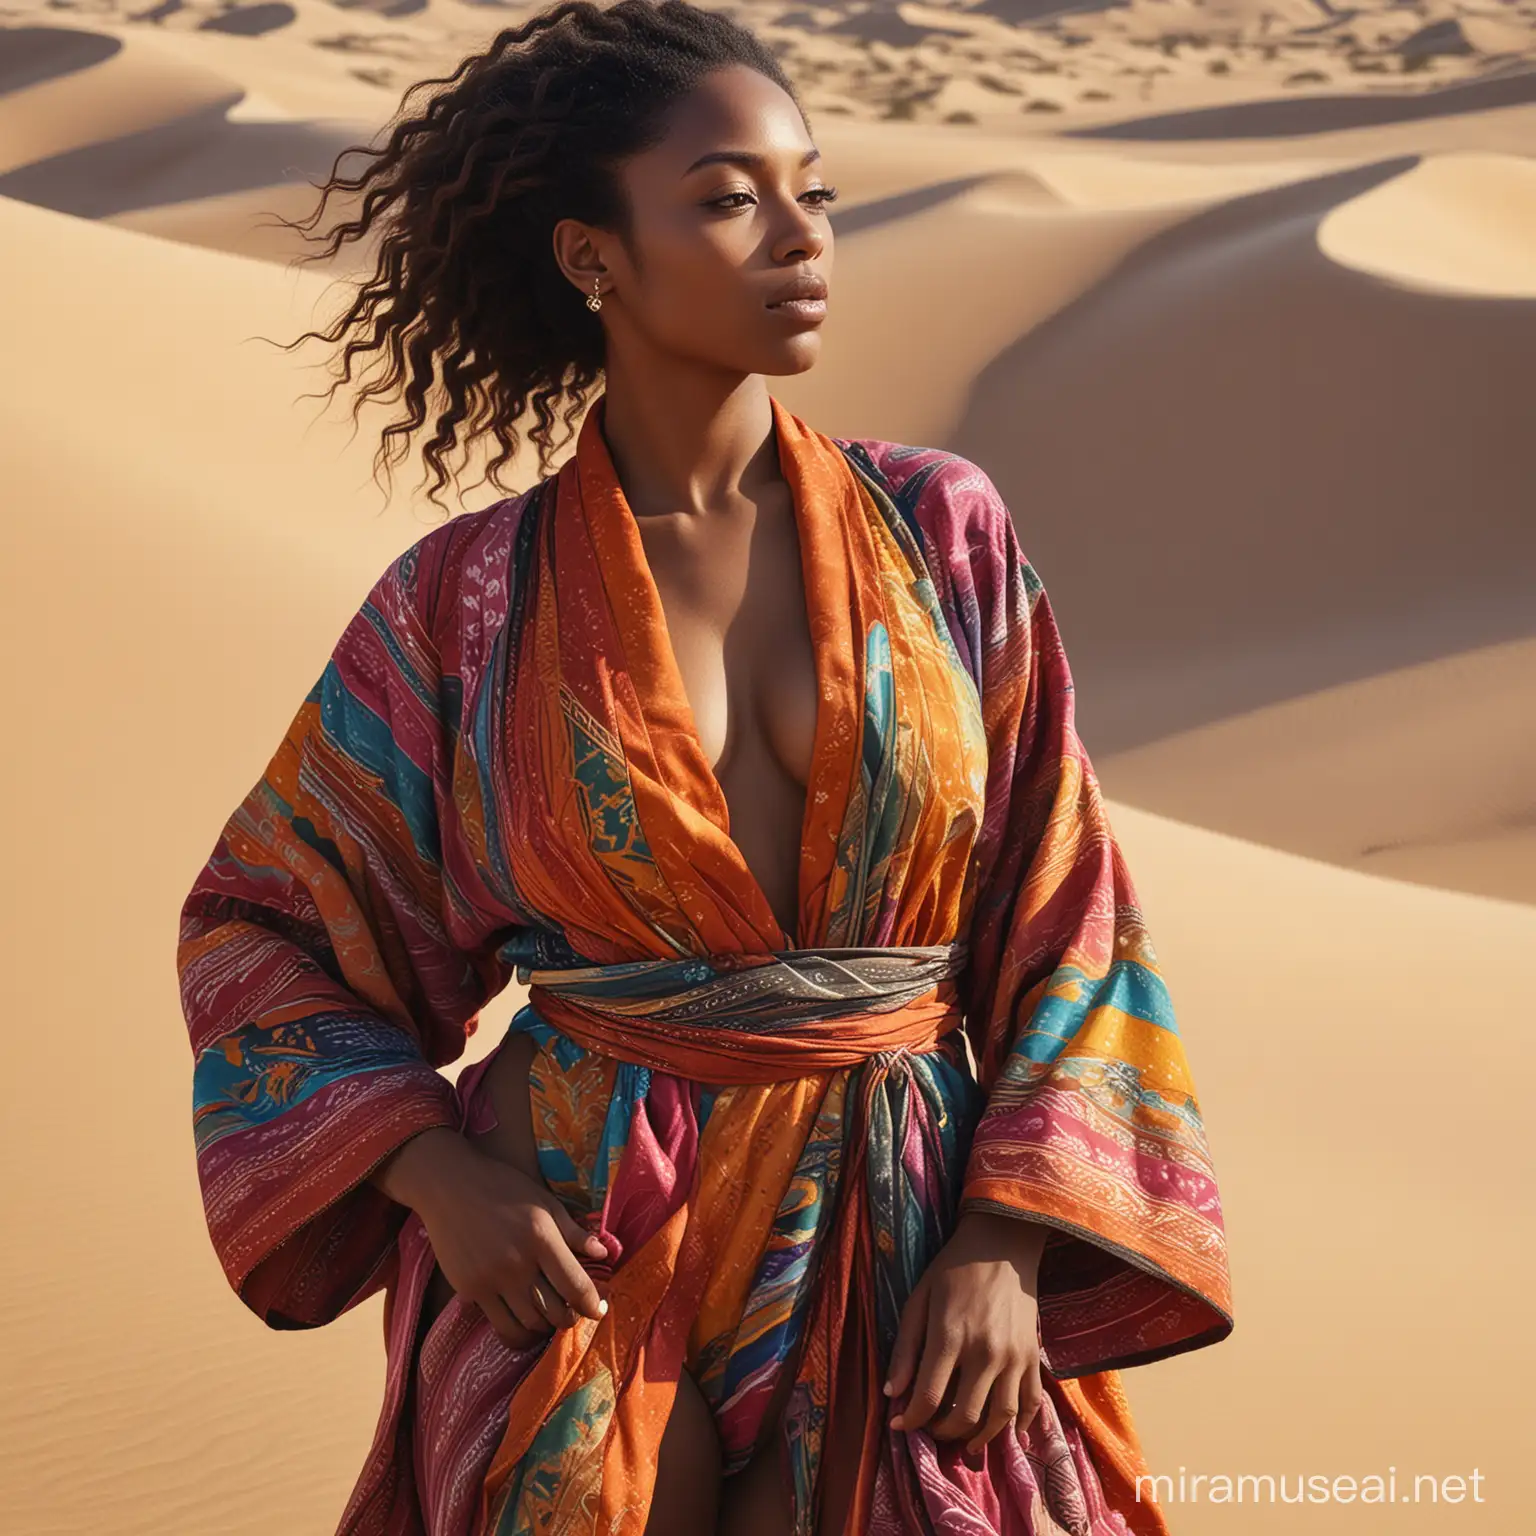 The image is a painting of a person wearing a colorful robe.The image features a desert landscape with sand dunes.Black woman beautiful face is shown.  The woman's body parts such as chest, thigh, stomach, and abdomen are visible.painterly smooth, extremely sharp detail, finely tuned detail, 8 k, ultra sharp focus, illustration, illustration, art by Ayami Kojima Beautiful Thick Black